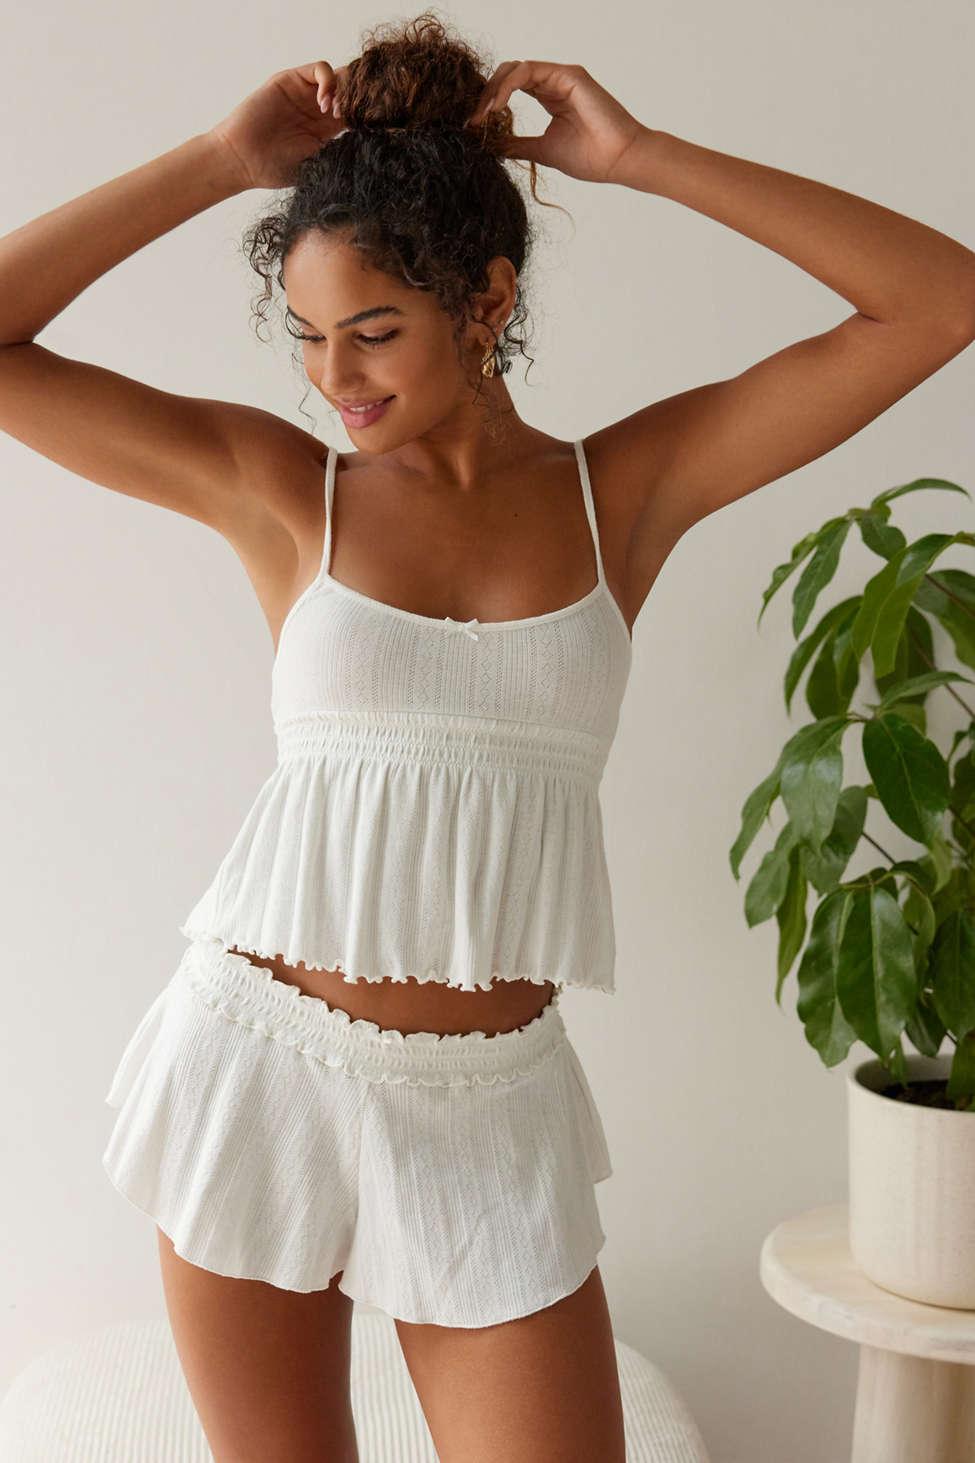 Urban Outfitters Out From Under Odette Seamless Cami